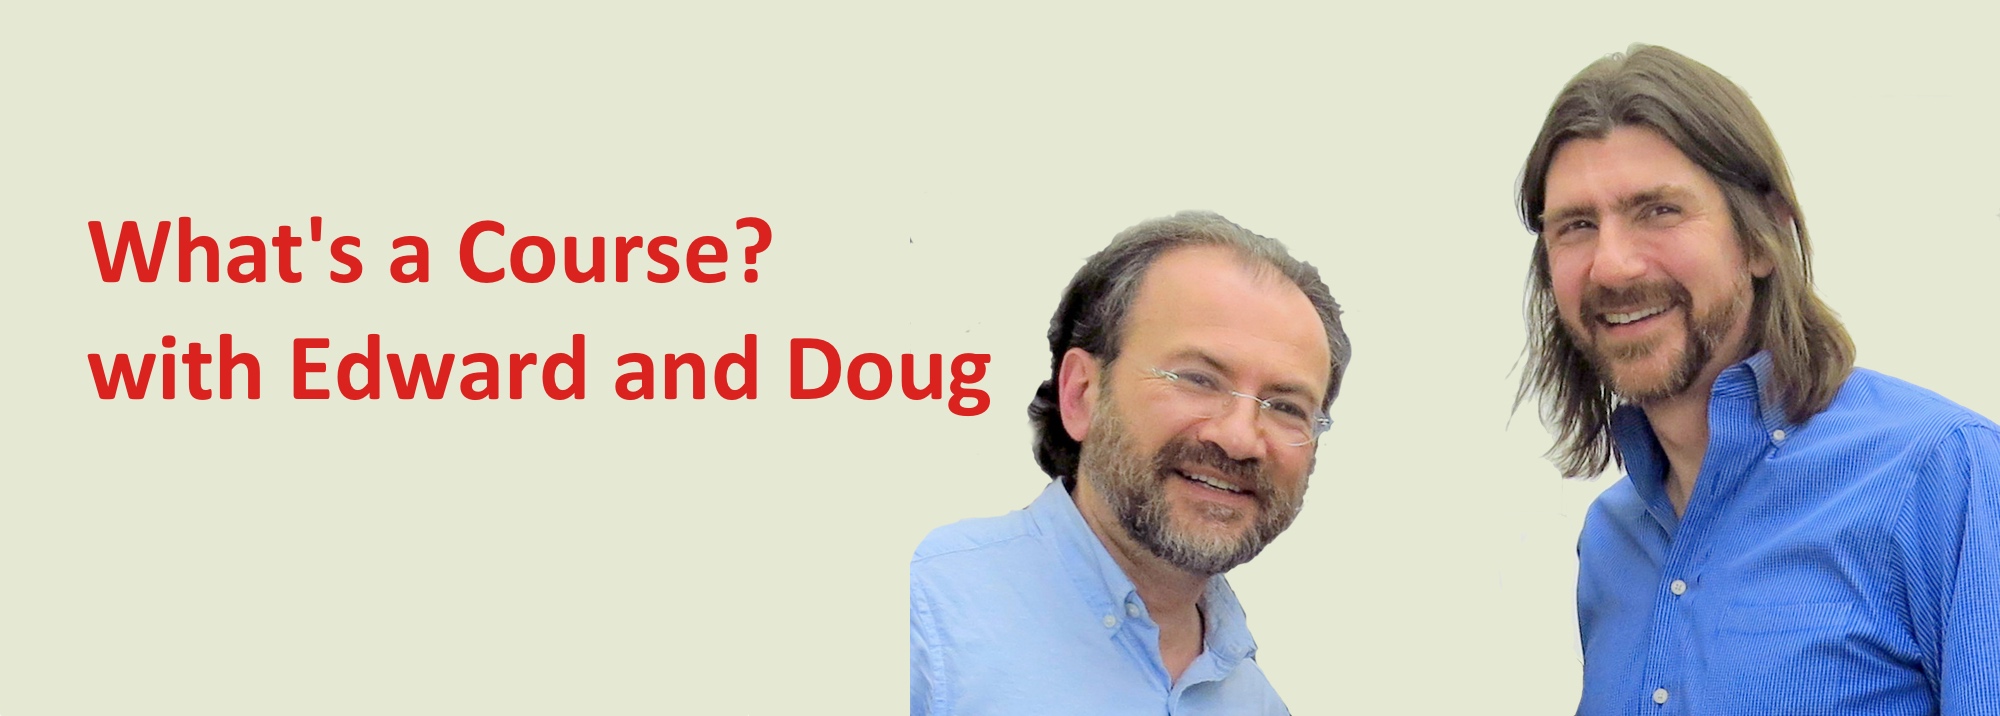 Podcast #53: What's a Course? with Edward and Doug
                               